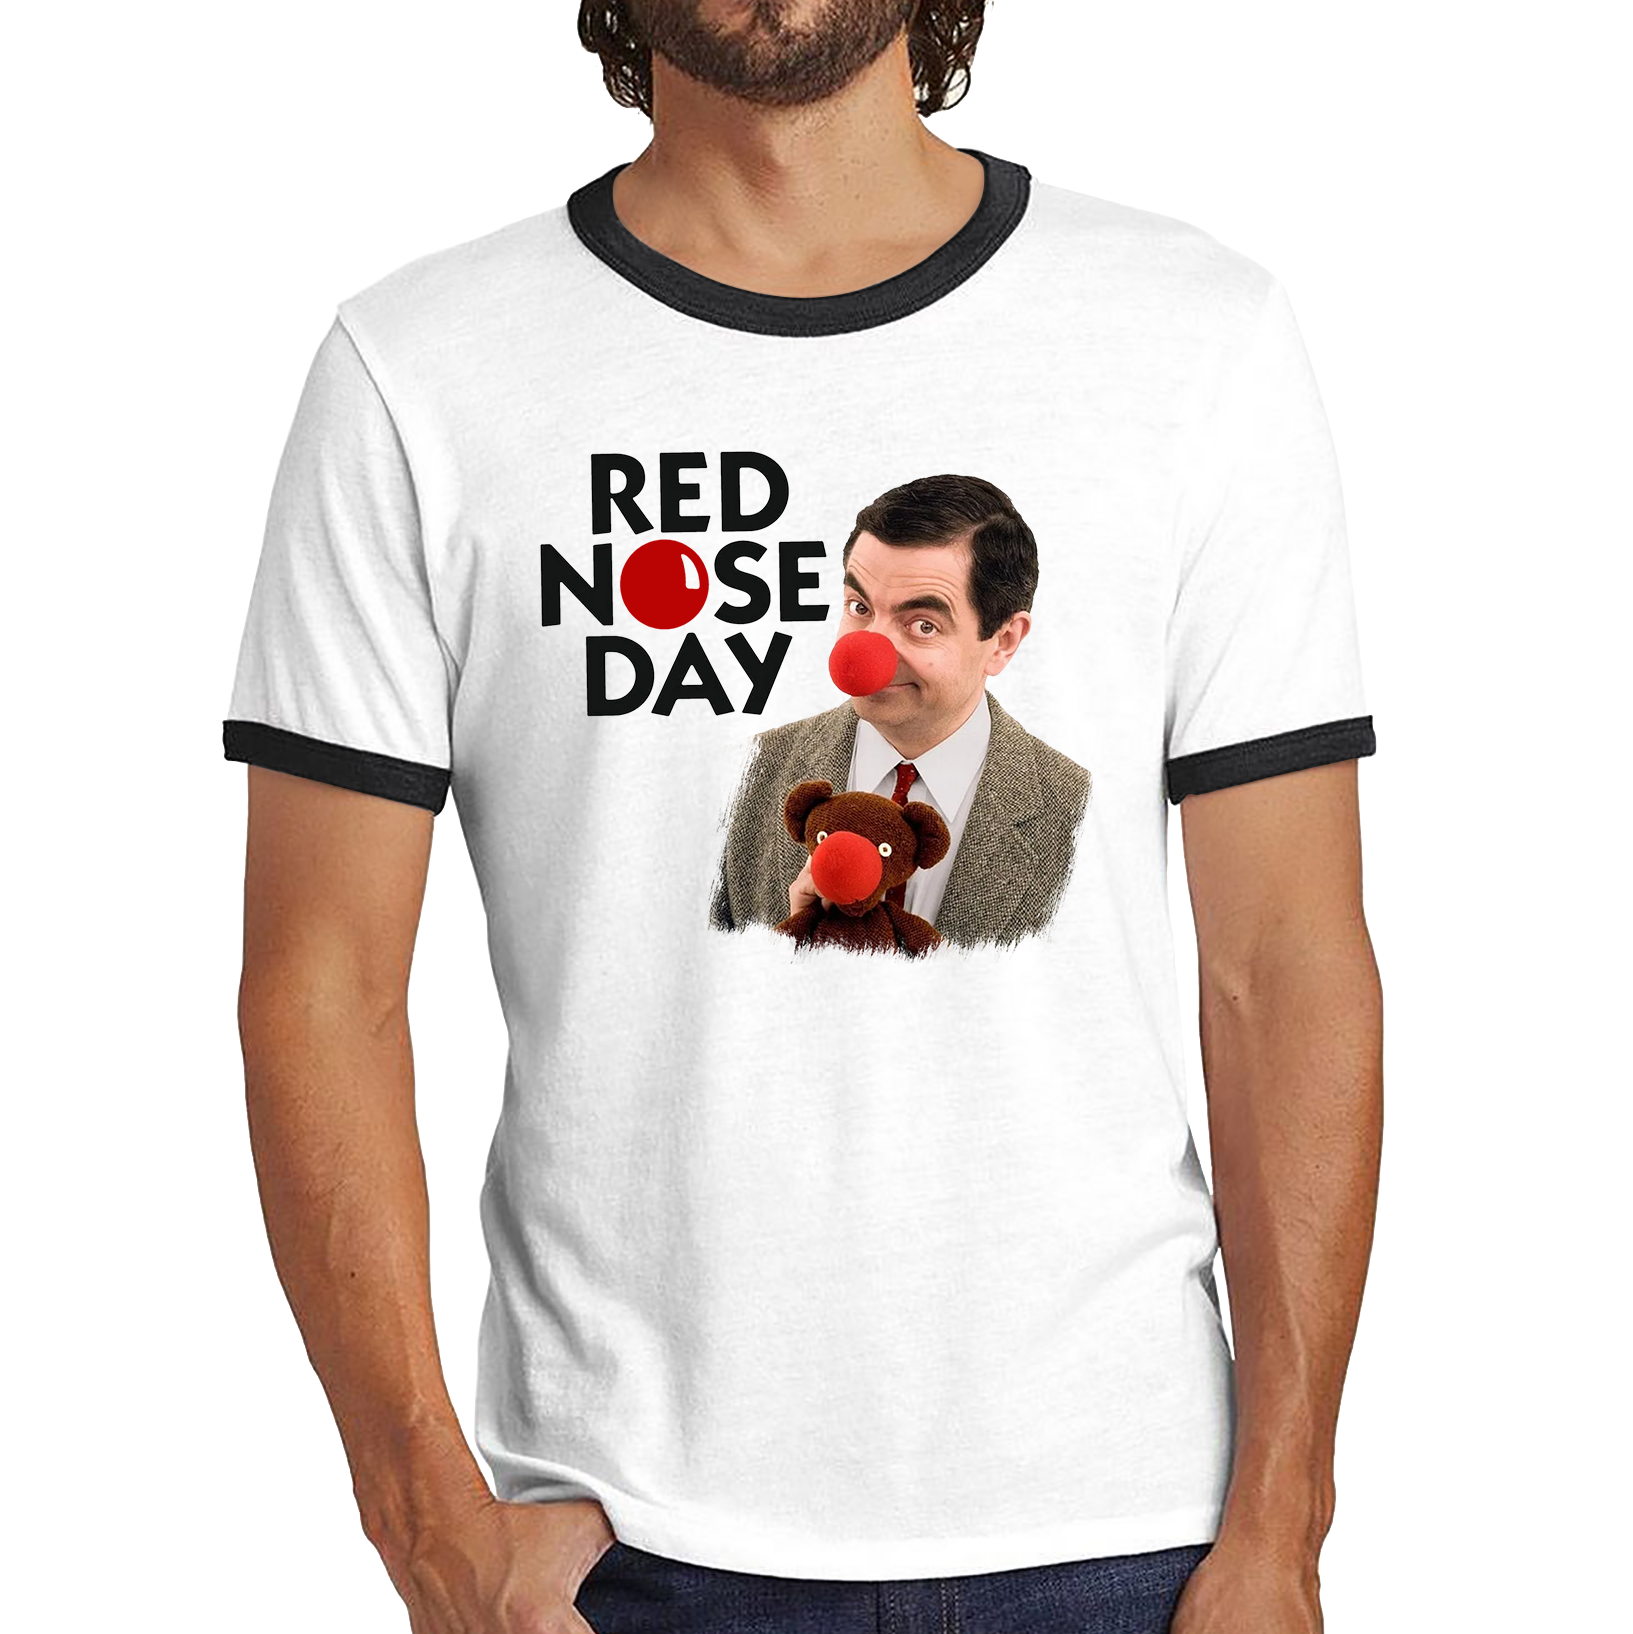 Red Nose Day Funny Mr Bean Ringer T Shirt. 50% Goes To Charity